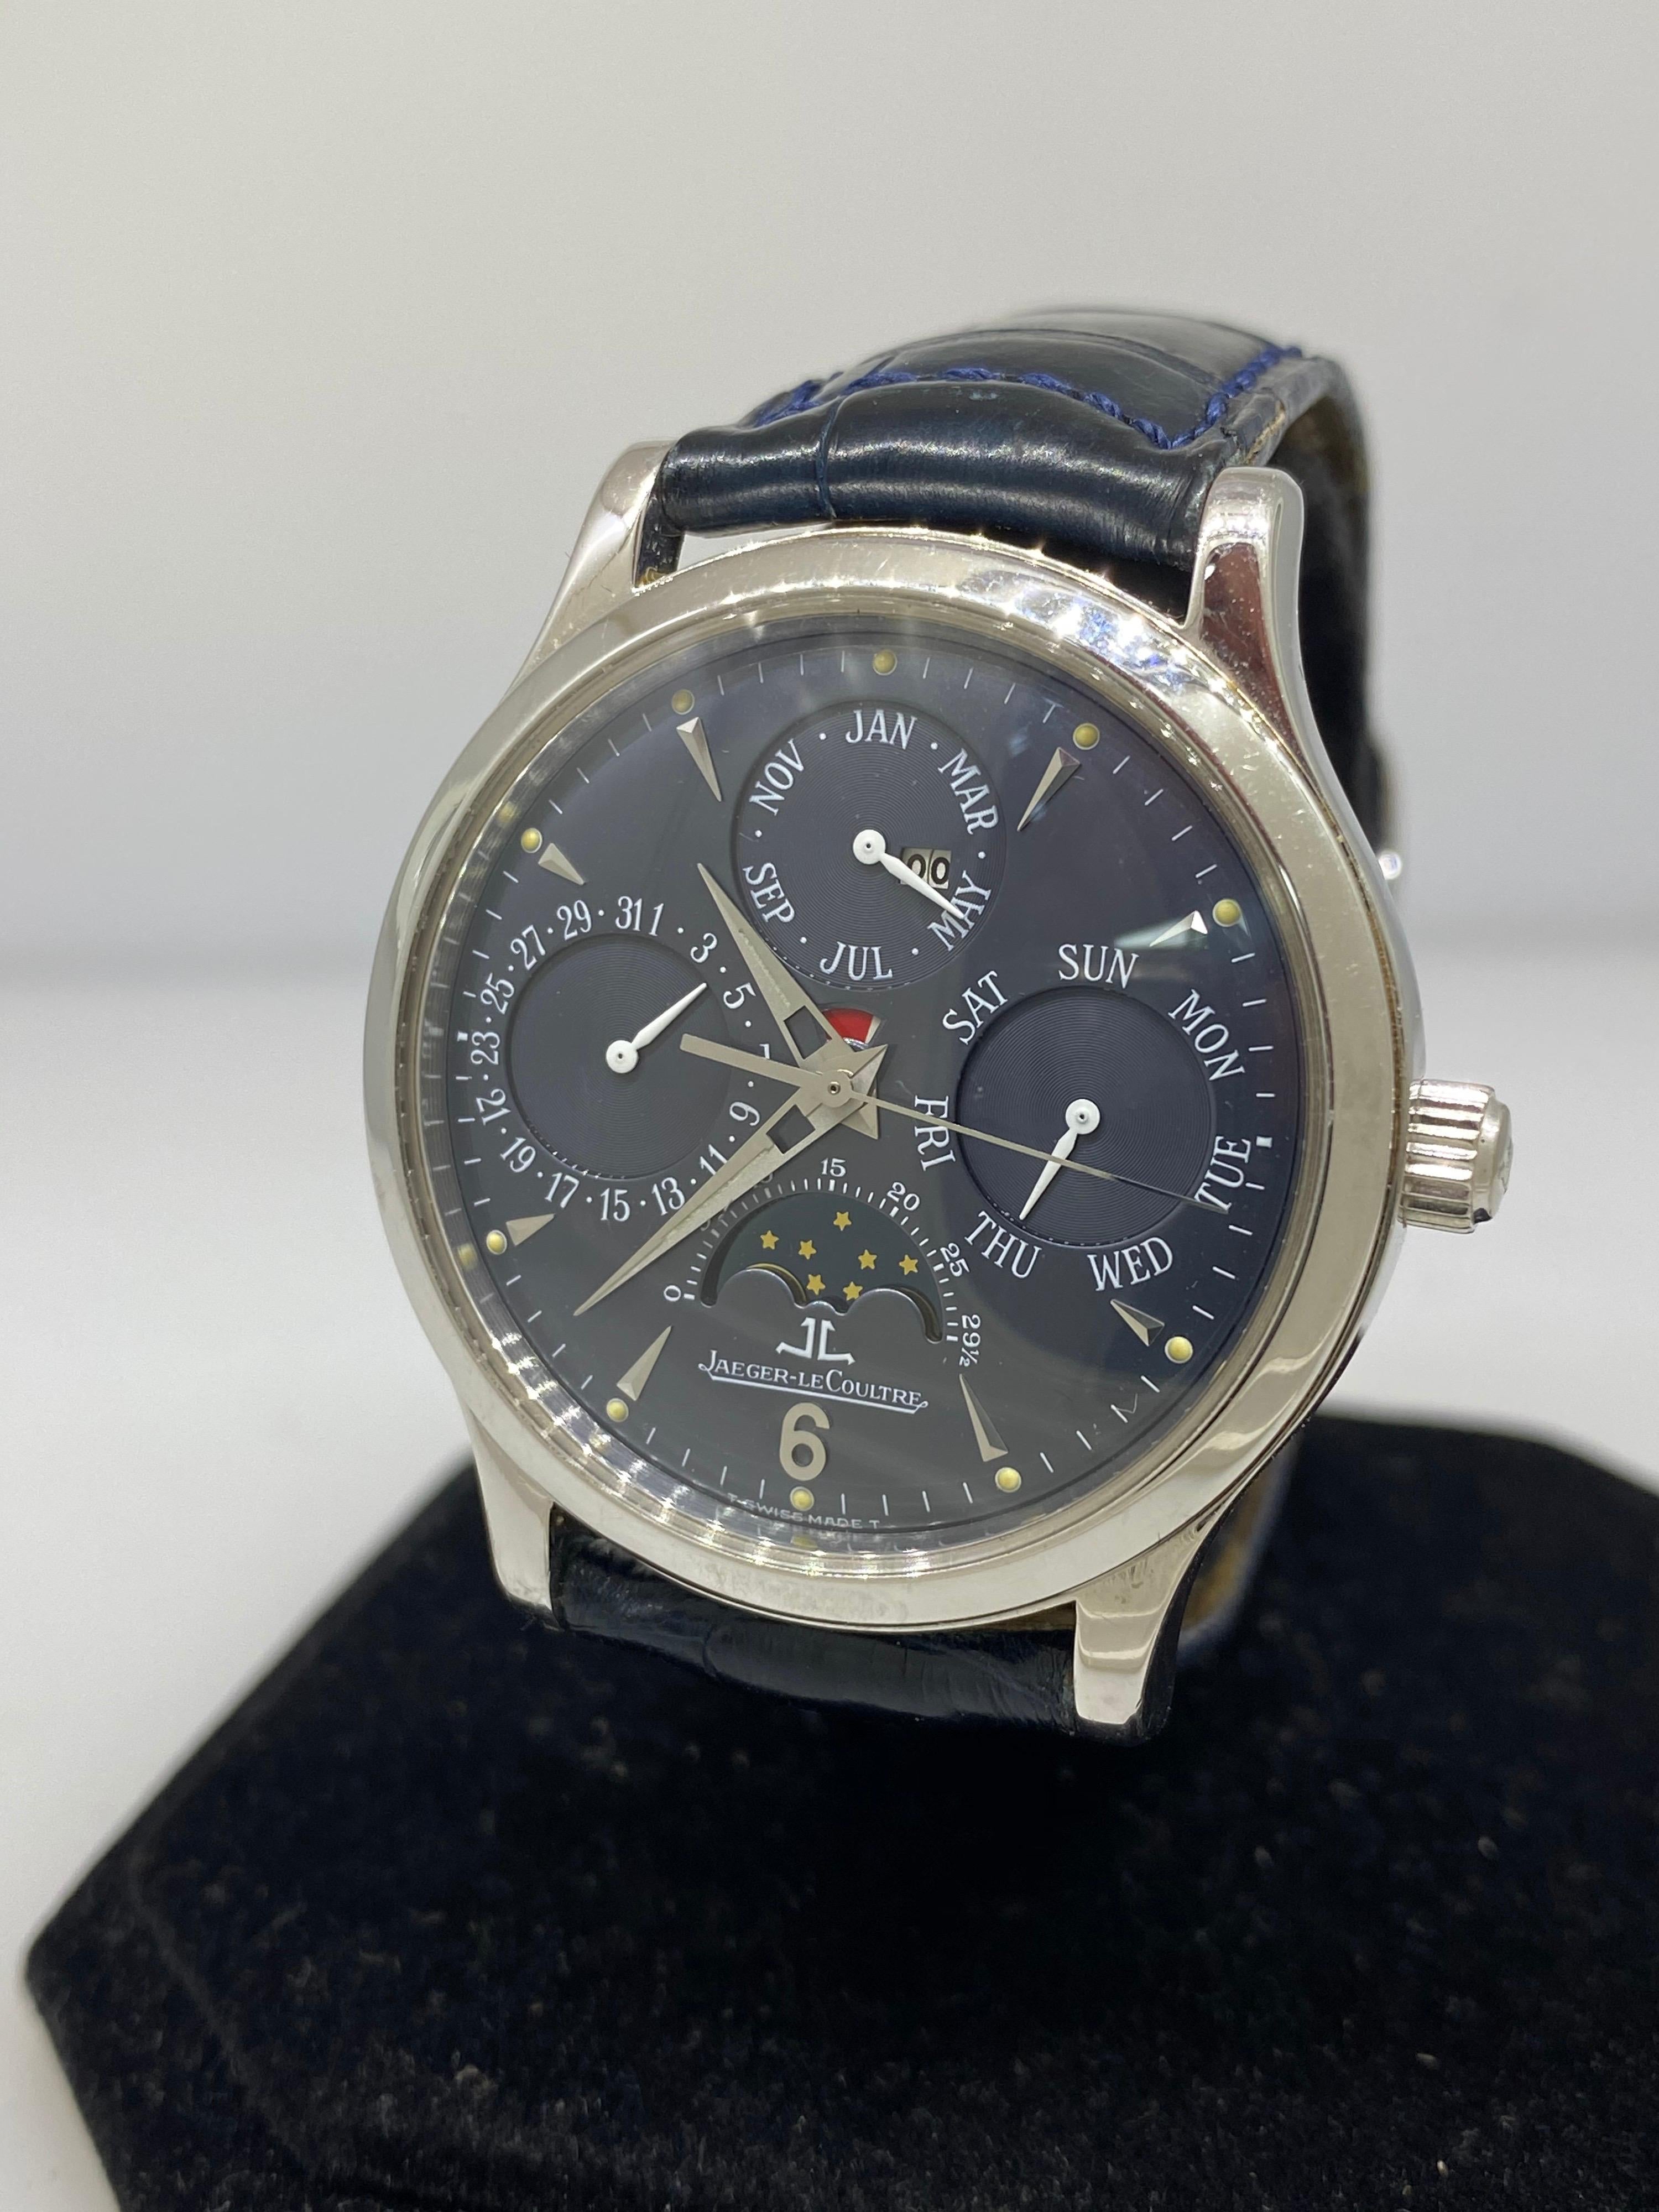 Jaeger LeCoultre Master Control Perpetual Calendar Men's Watch

Model Number: 140.6.80

Limited Edition to 250 Pieces

100% Authentic

Preowned in excellent condition

Comes with a generic watch box

Platinum Case

Charcoal Dial

Functions: